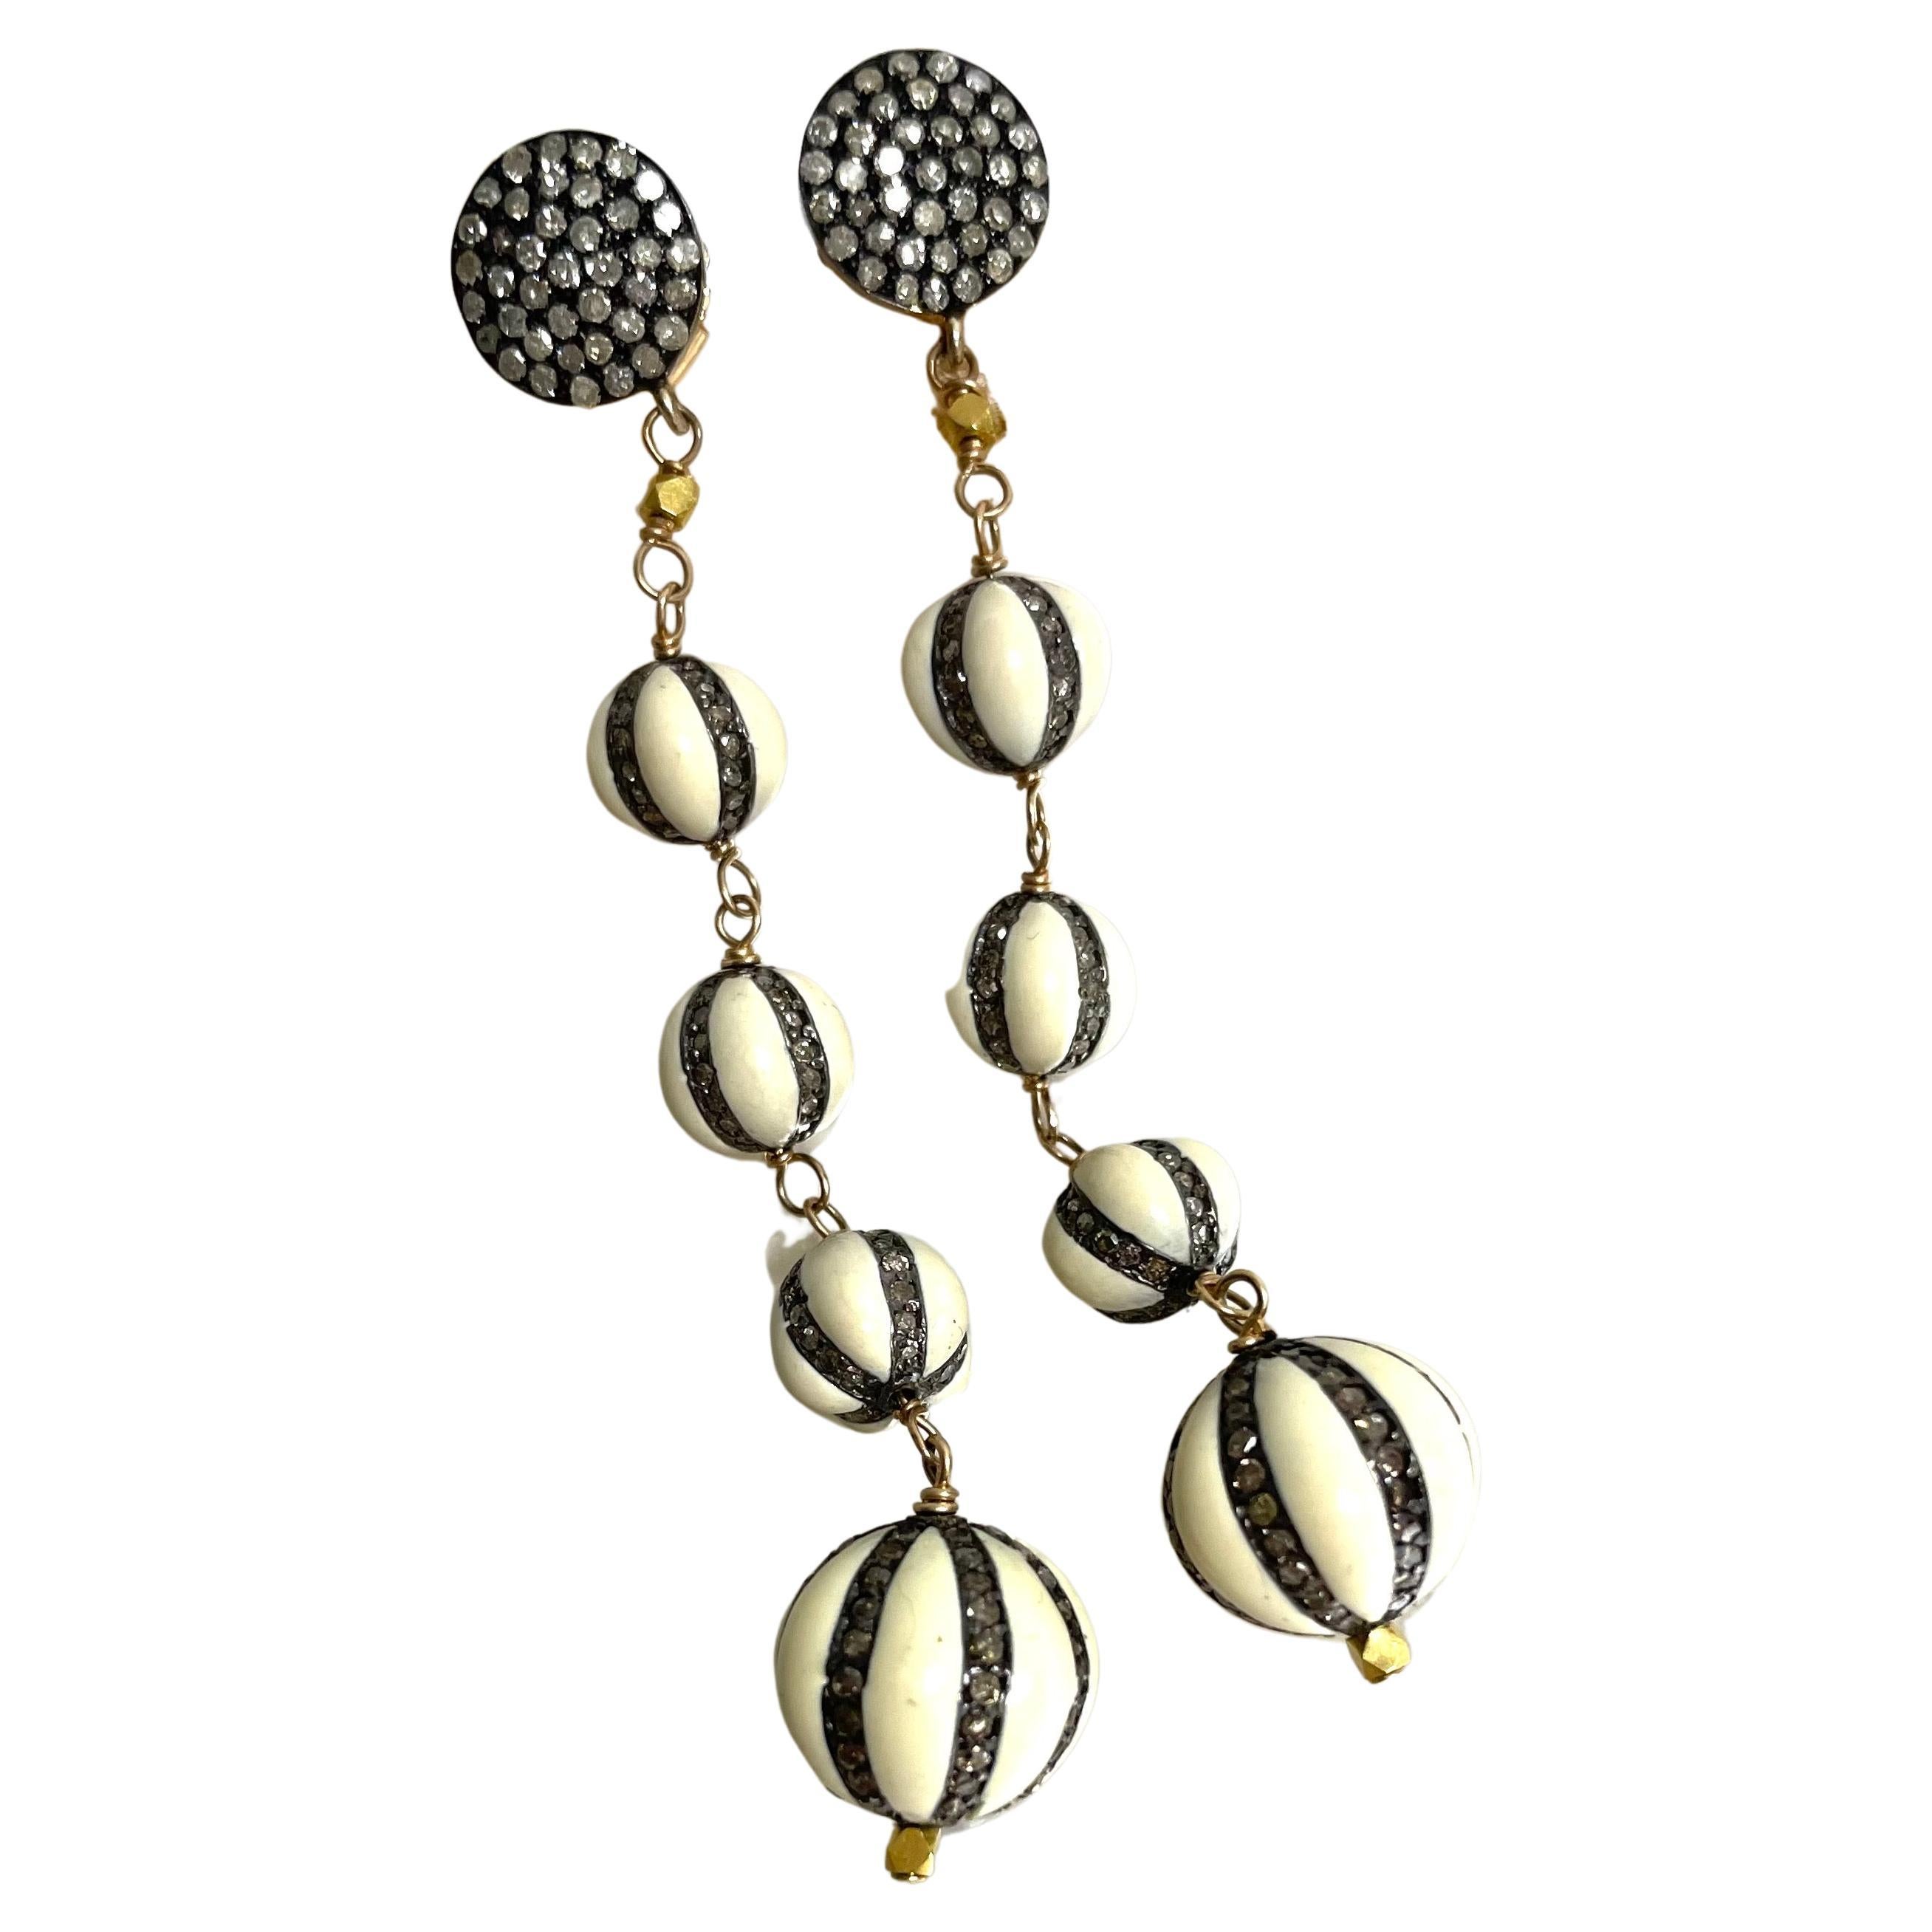 Round Cut Enamel and Pave Diamond Melon Ball Design Earrings For Sale